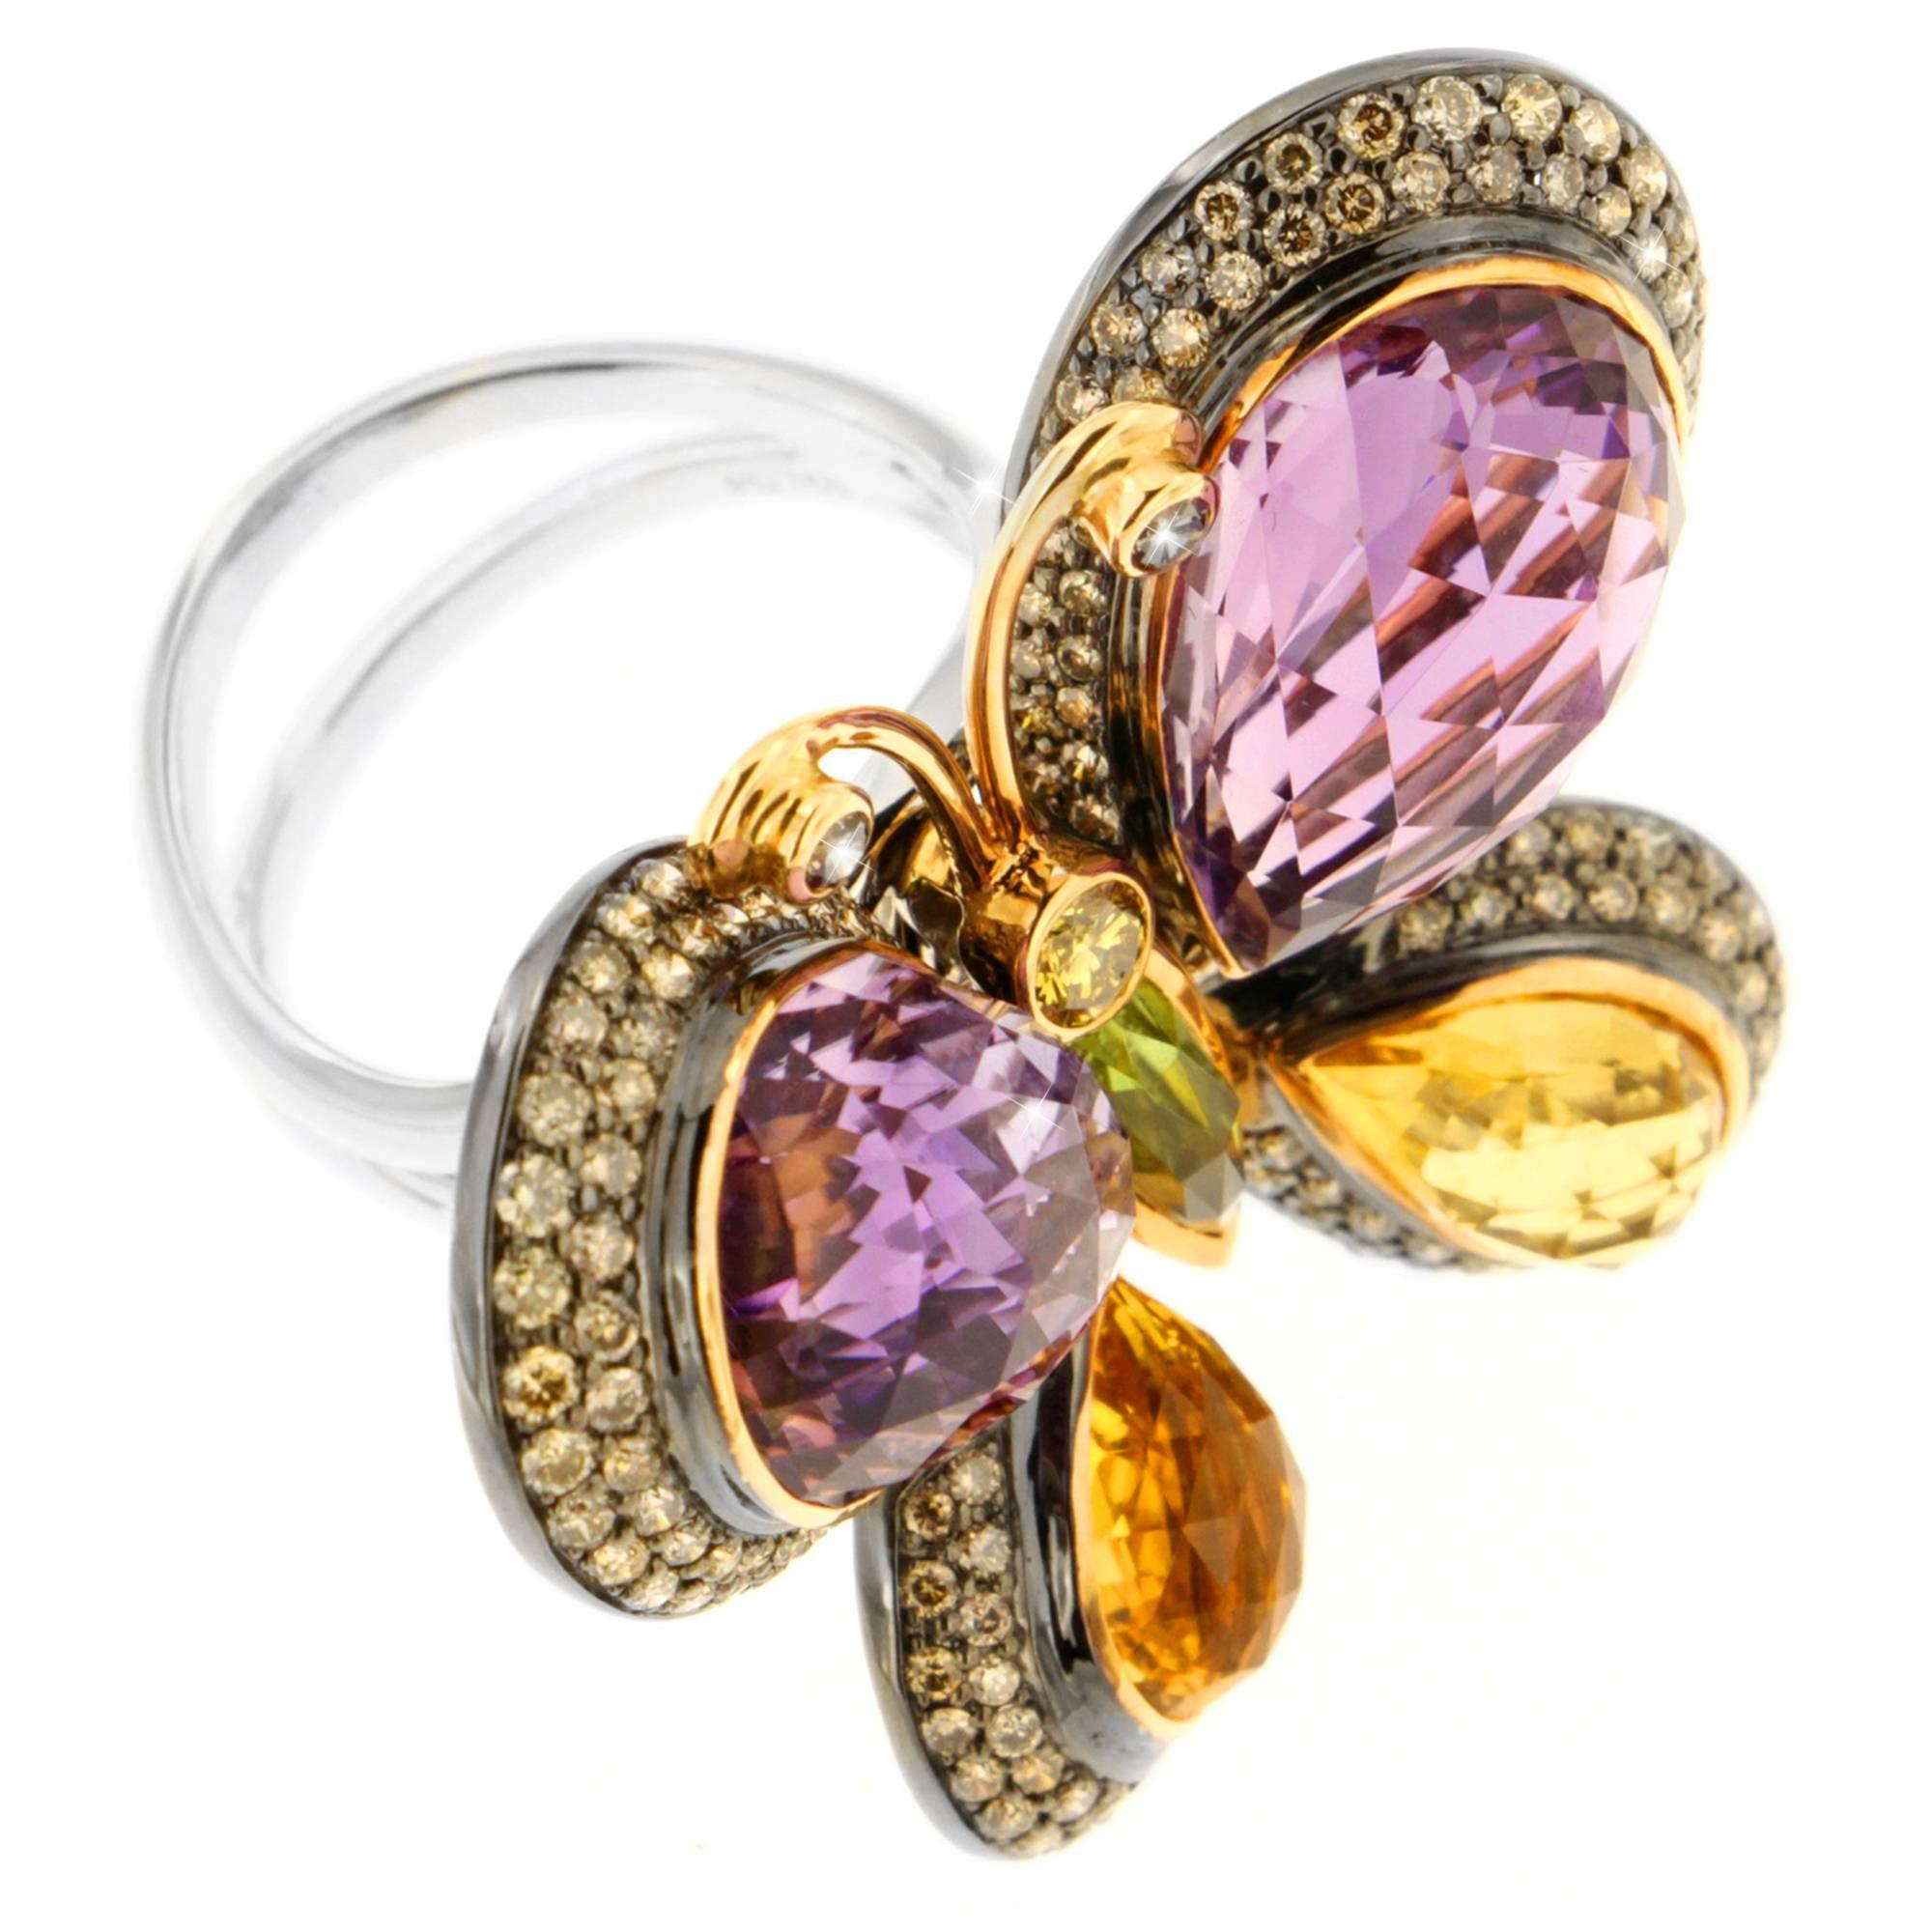 When you possess this ring, something more than your heart will be a flutter.  This artfully designed ring offers interactivity within its glowing amethyst 16.80 carats, Peridot 0.72 carats and 3.93 carats of citrine quartz faceted butterfly wing